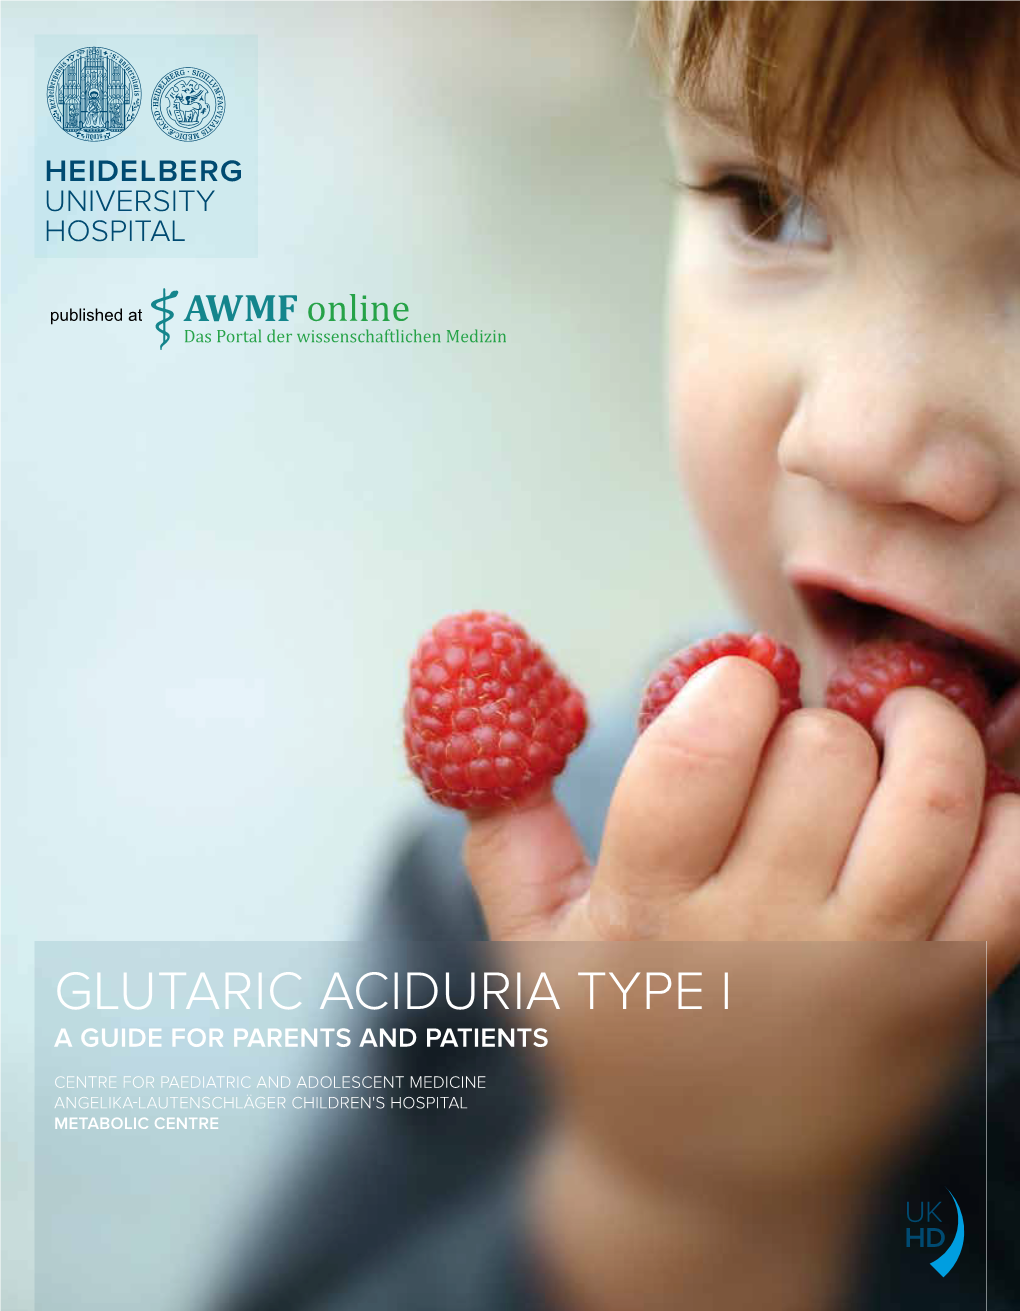 Glutaric Aciduria Type I a Guide for Parents and Patients